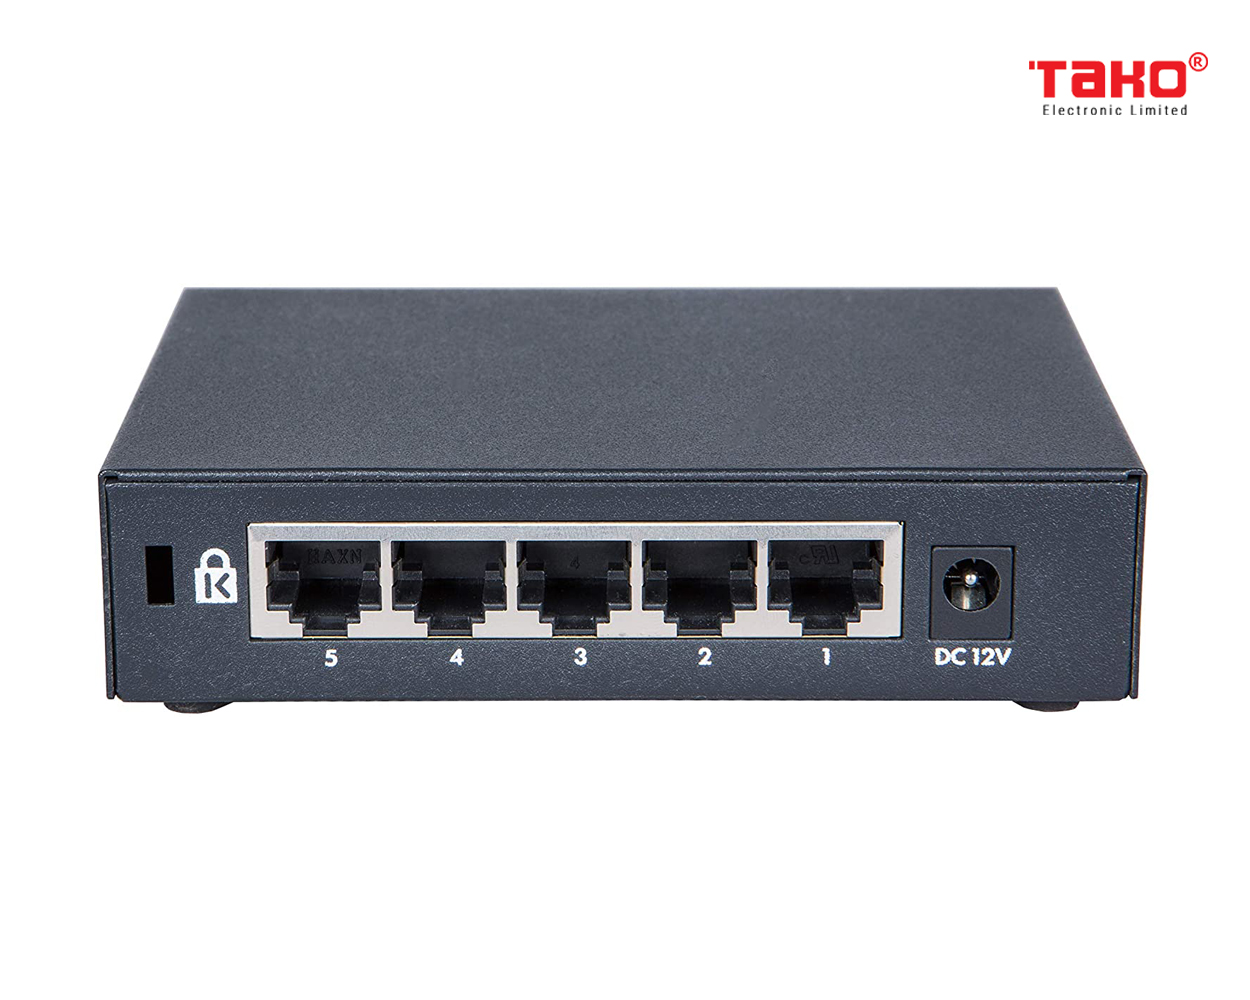 HPE OfficeConnect 1420 5-Port Gigabit Ethernet Unmanaged Switch-5 x GE 10/100/1000 (JH327A#ABA) 4